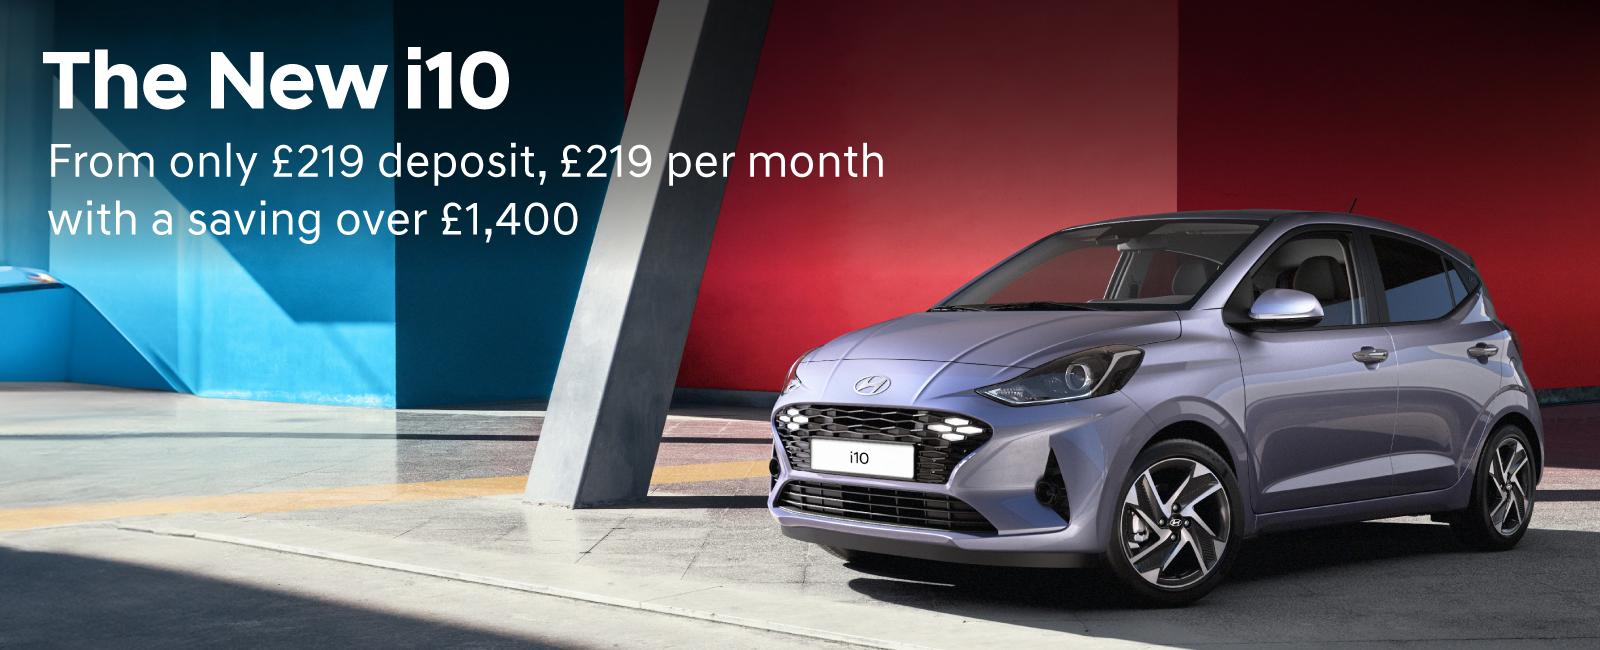 The Hyundai i10 from only £219 deposit, £219 per month